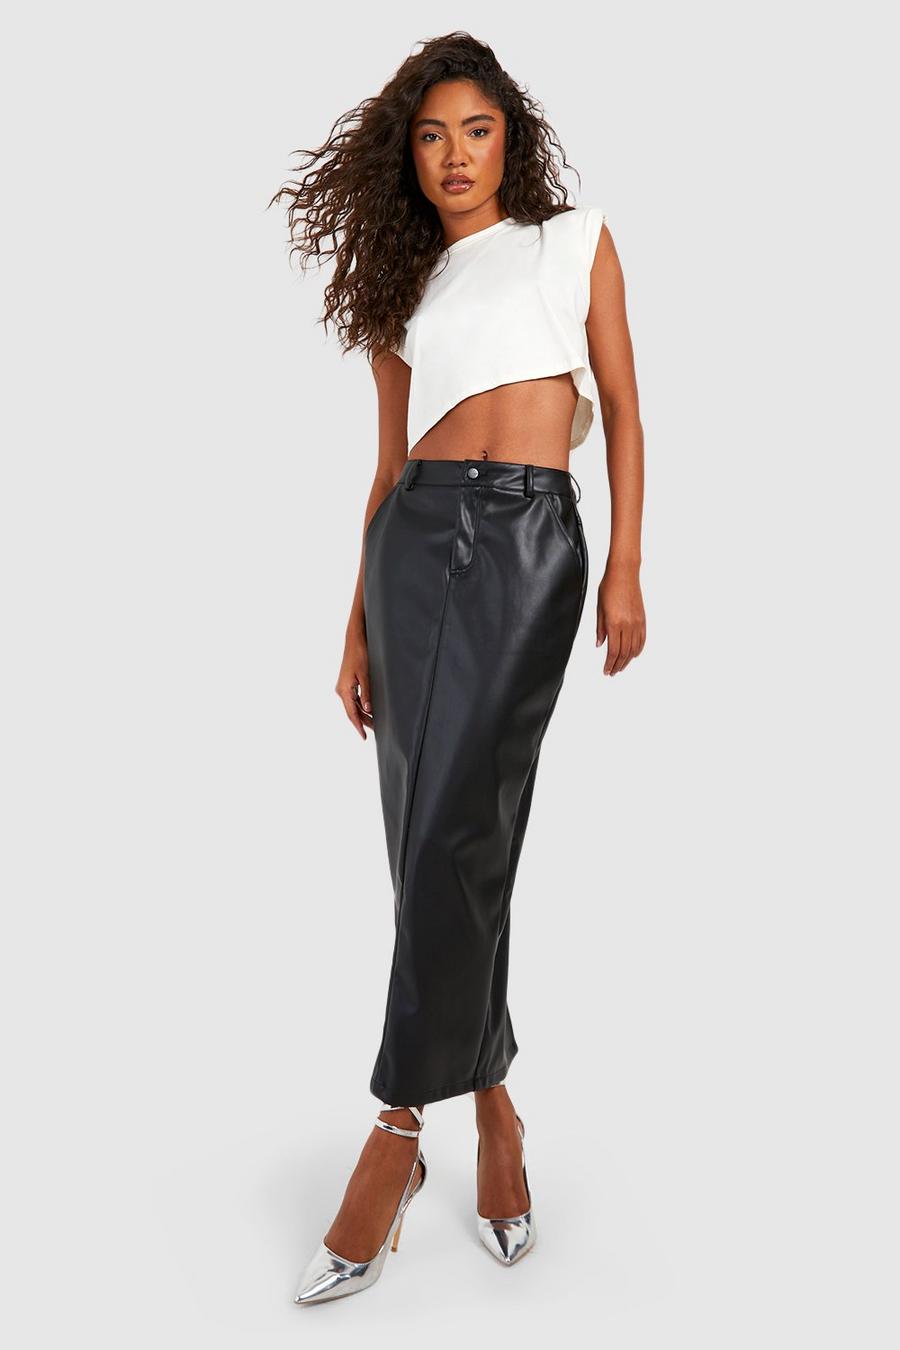 Black Tall Leather Look High Waisted Midaxi Skirt image number 1